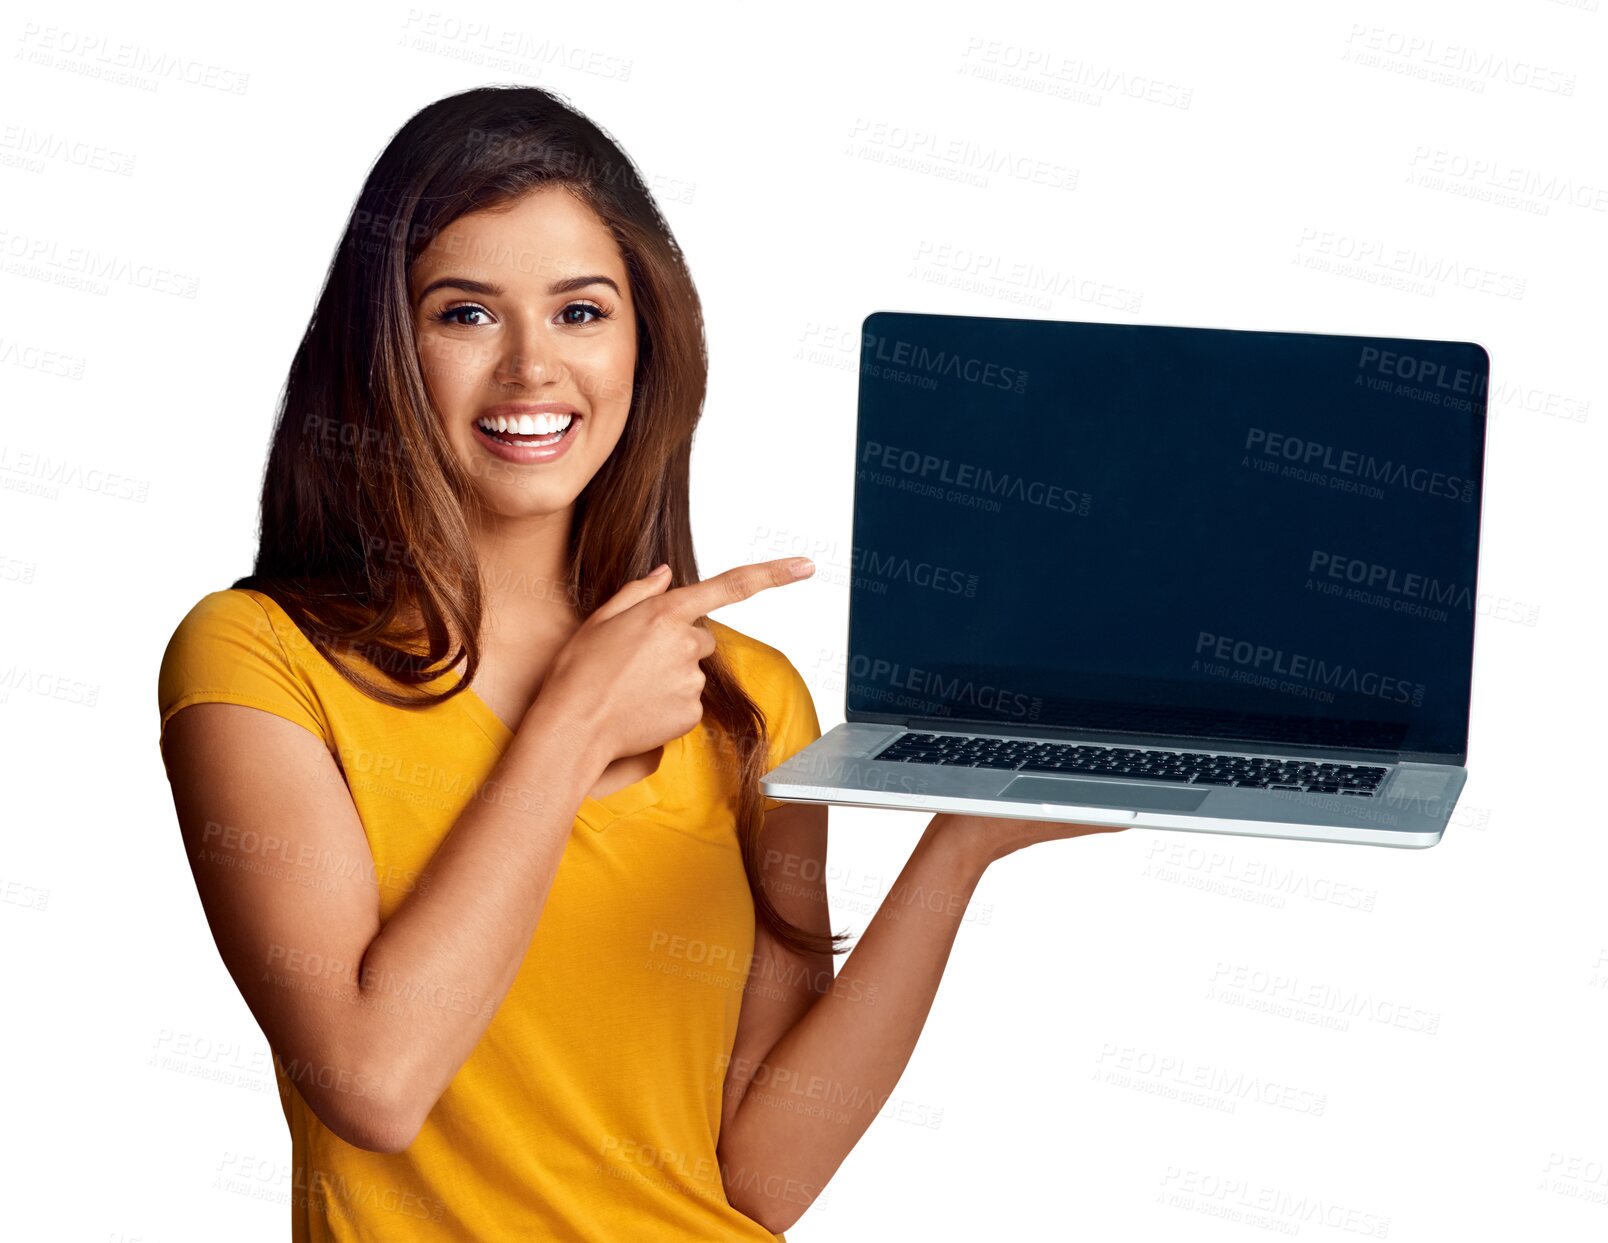 Buy stock photo Portrait, website and a woman pointing to a laptop screen isolated on a transparent background for information. Smile, internet and a happy young woman showing an empty display on PNG for marketing